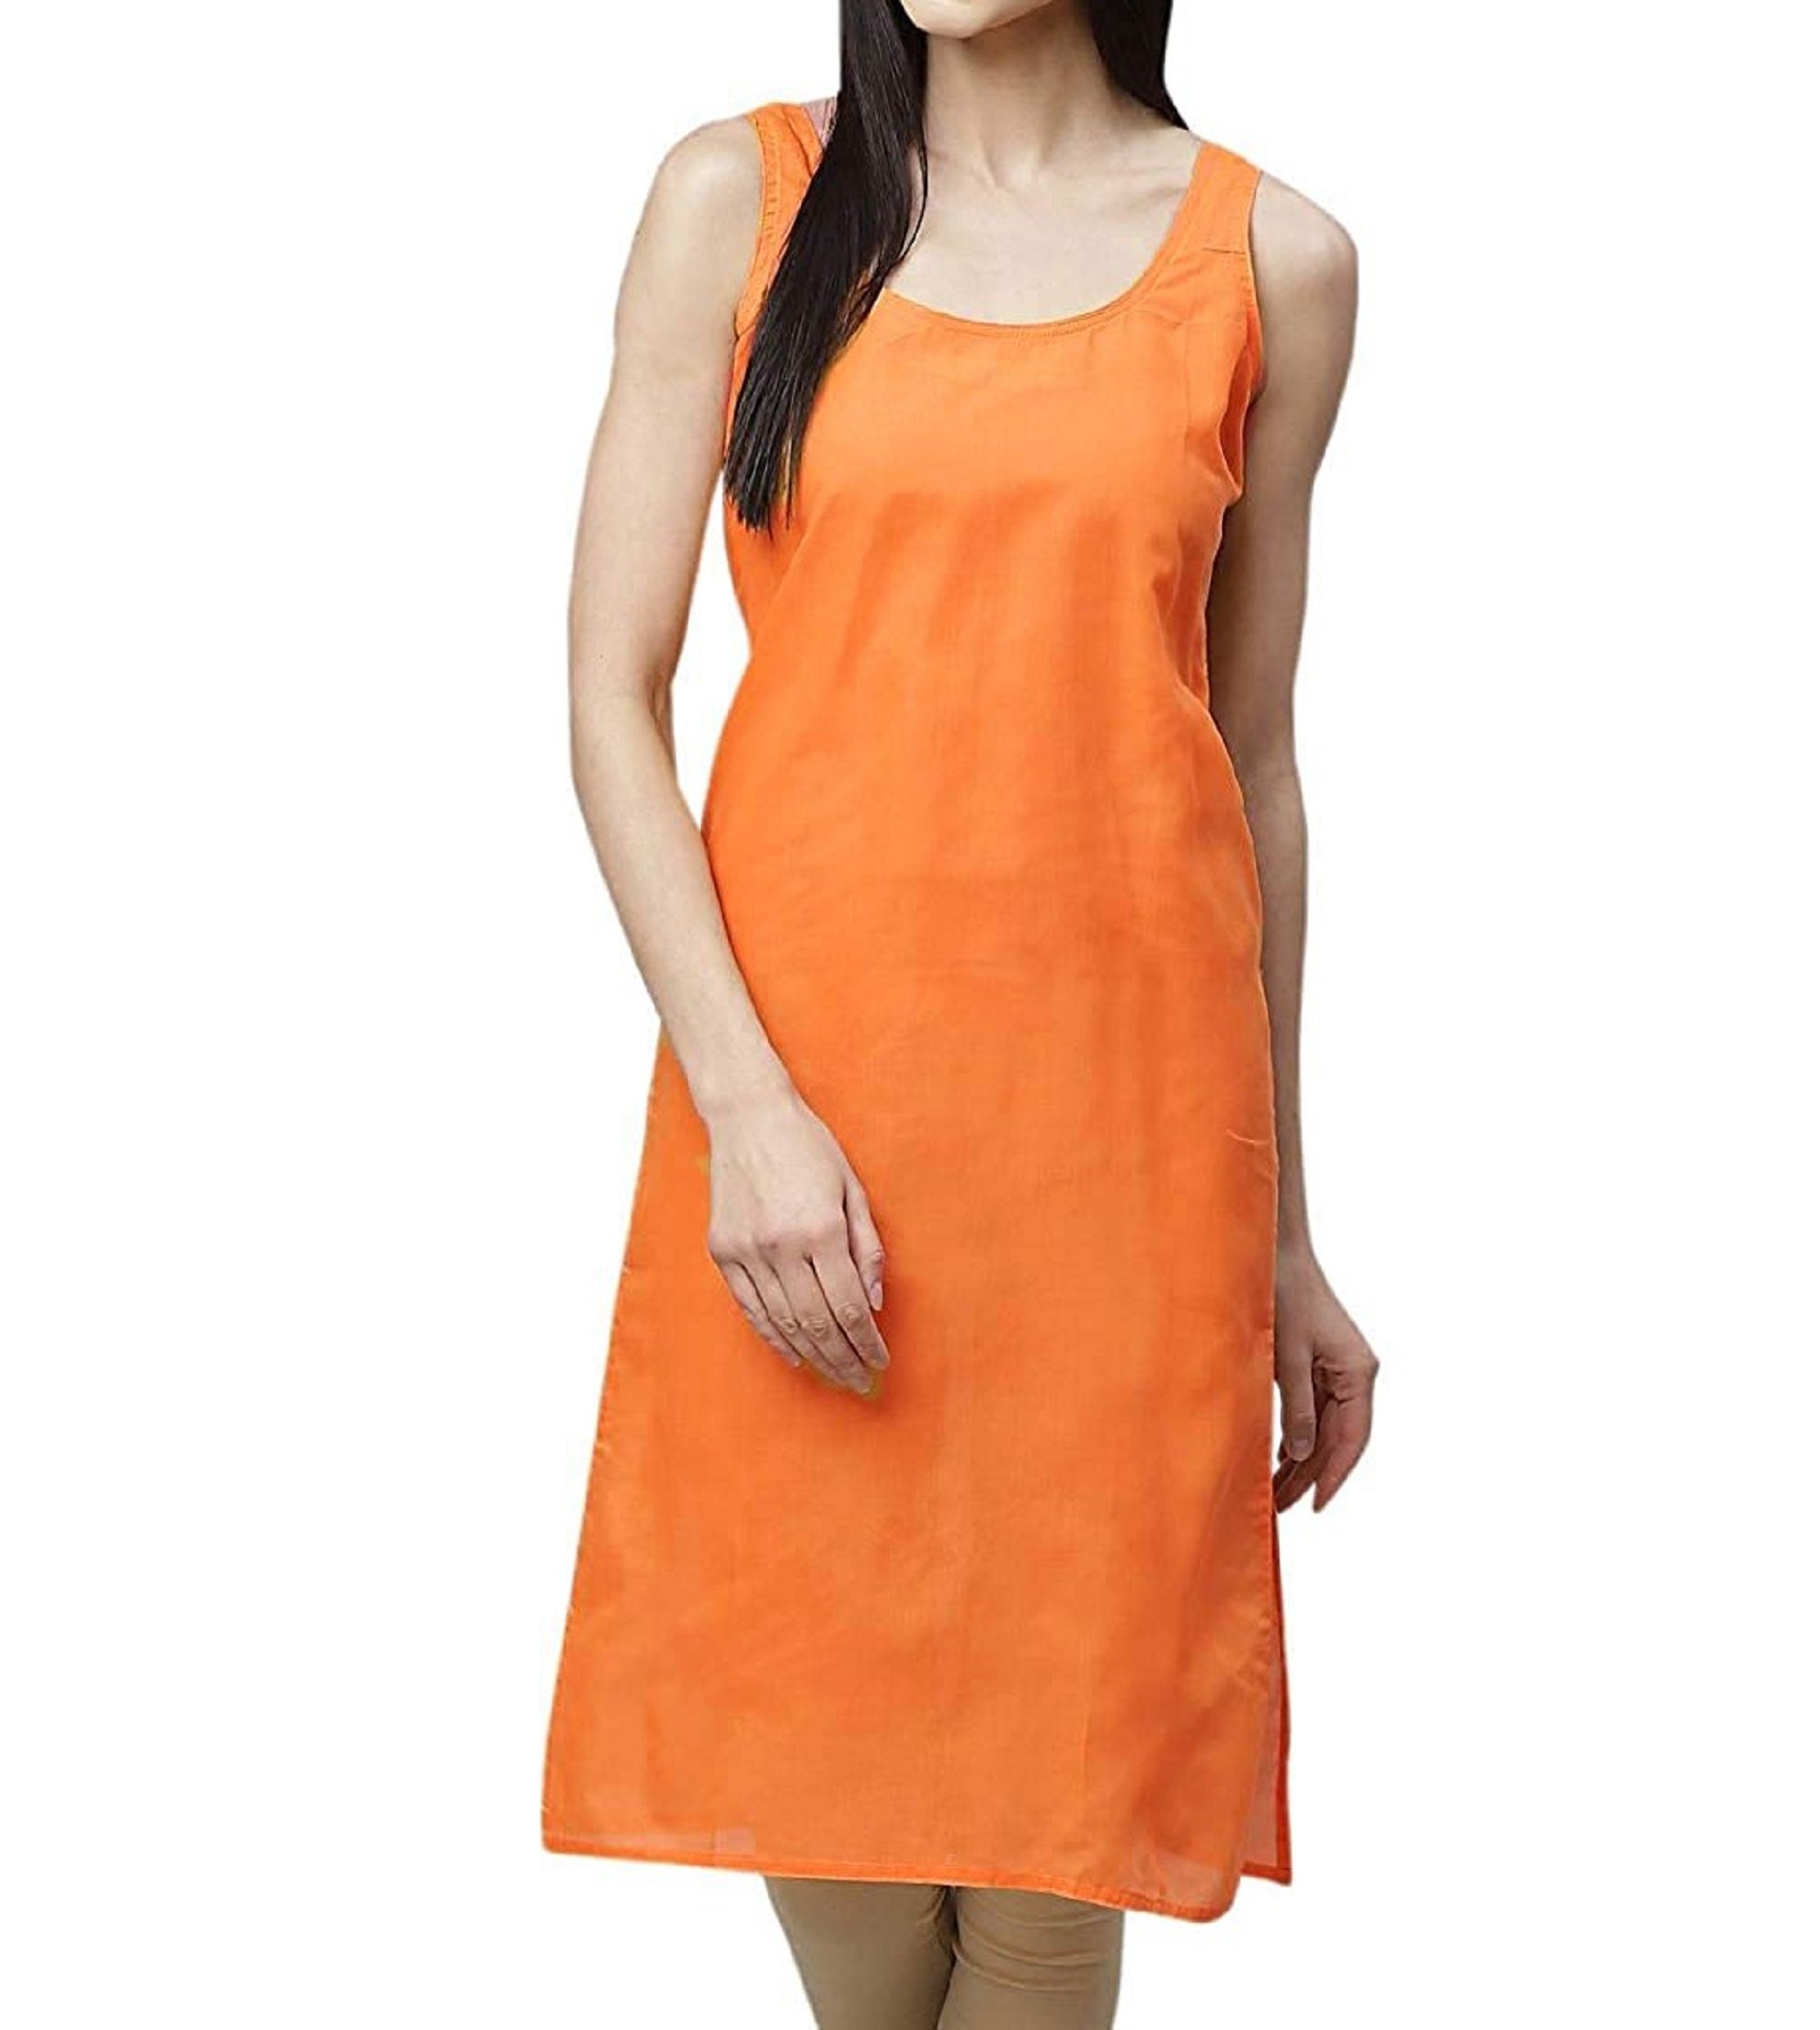 Shining Orange Festive A-line Kurti With Pants And Scalloped Organza  Dupatta at Rs 4999.00 | ए लाइन कुर्ती - Anokherang Collections OPC Private  Limited, Delhi | ID: 26008660555